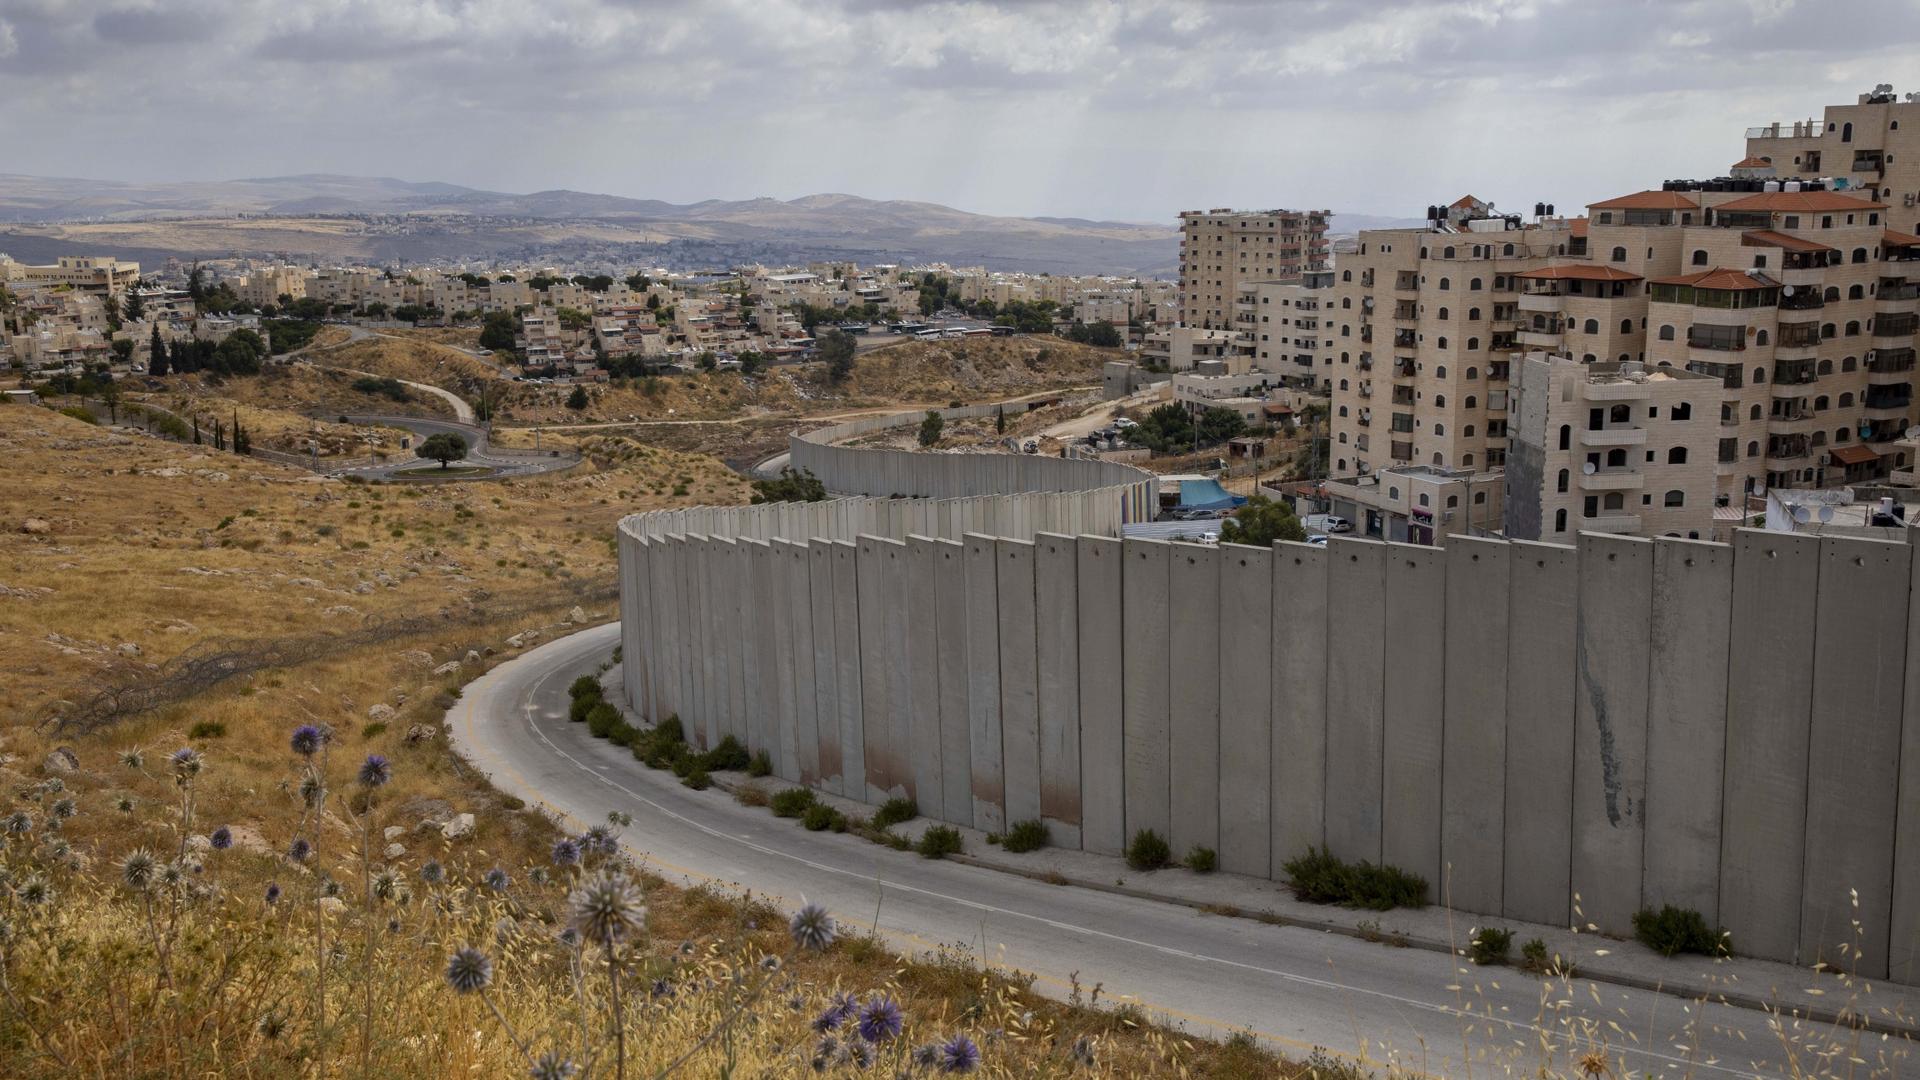 A view of Shuafat refugee camp is seen behind section of Israel's separation barrier in Jerusalem, June 19, 2020. 